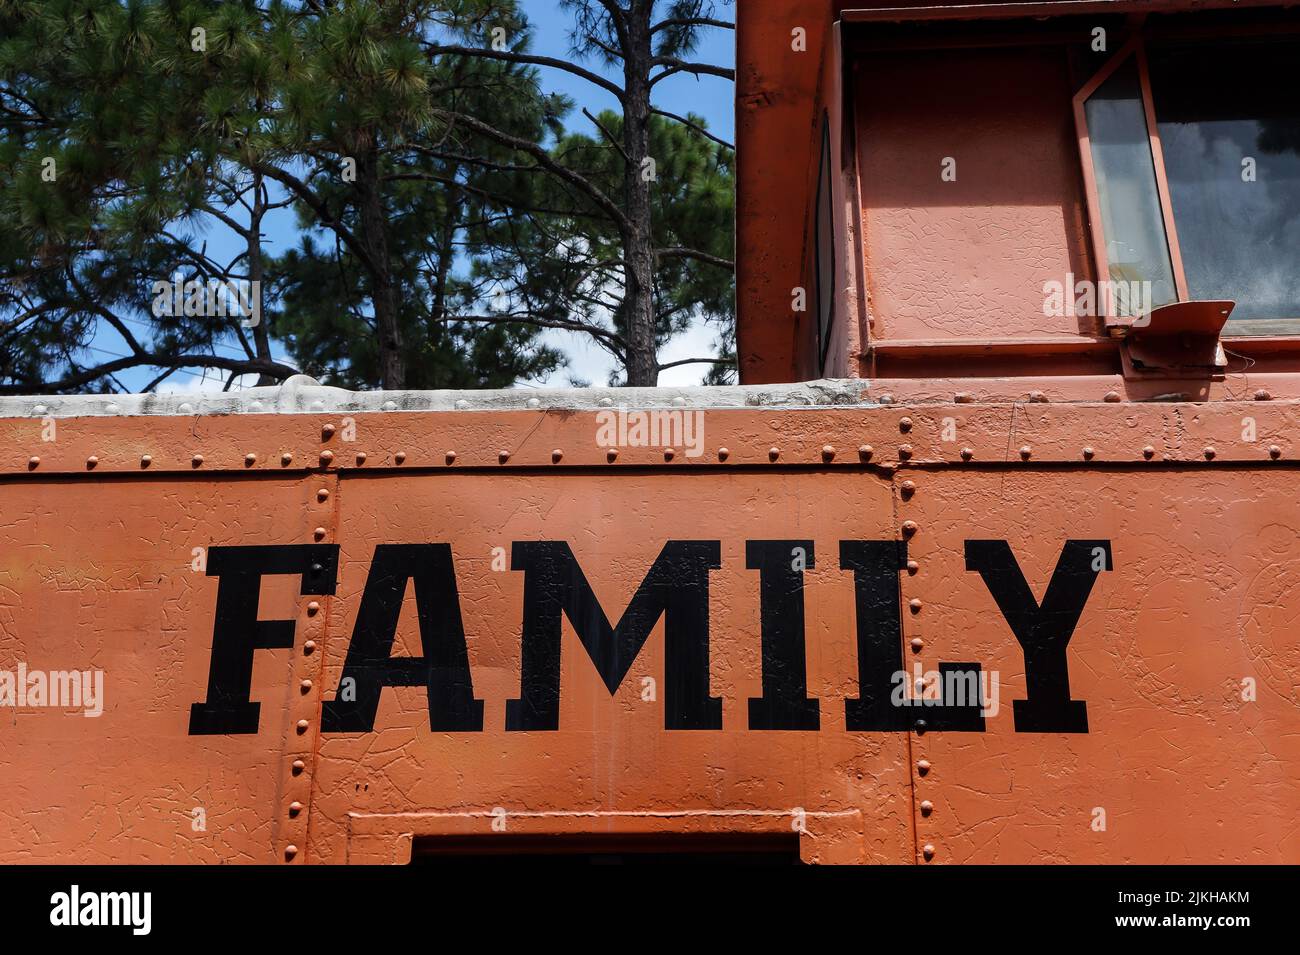 A closeup shot of the word 'FAMILY' painted in black on an orange metal surface Stock Photo